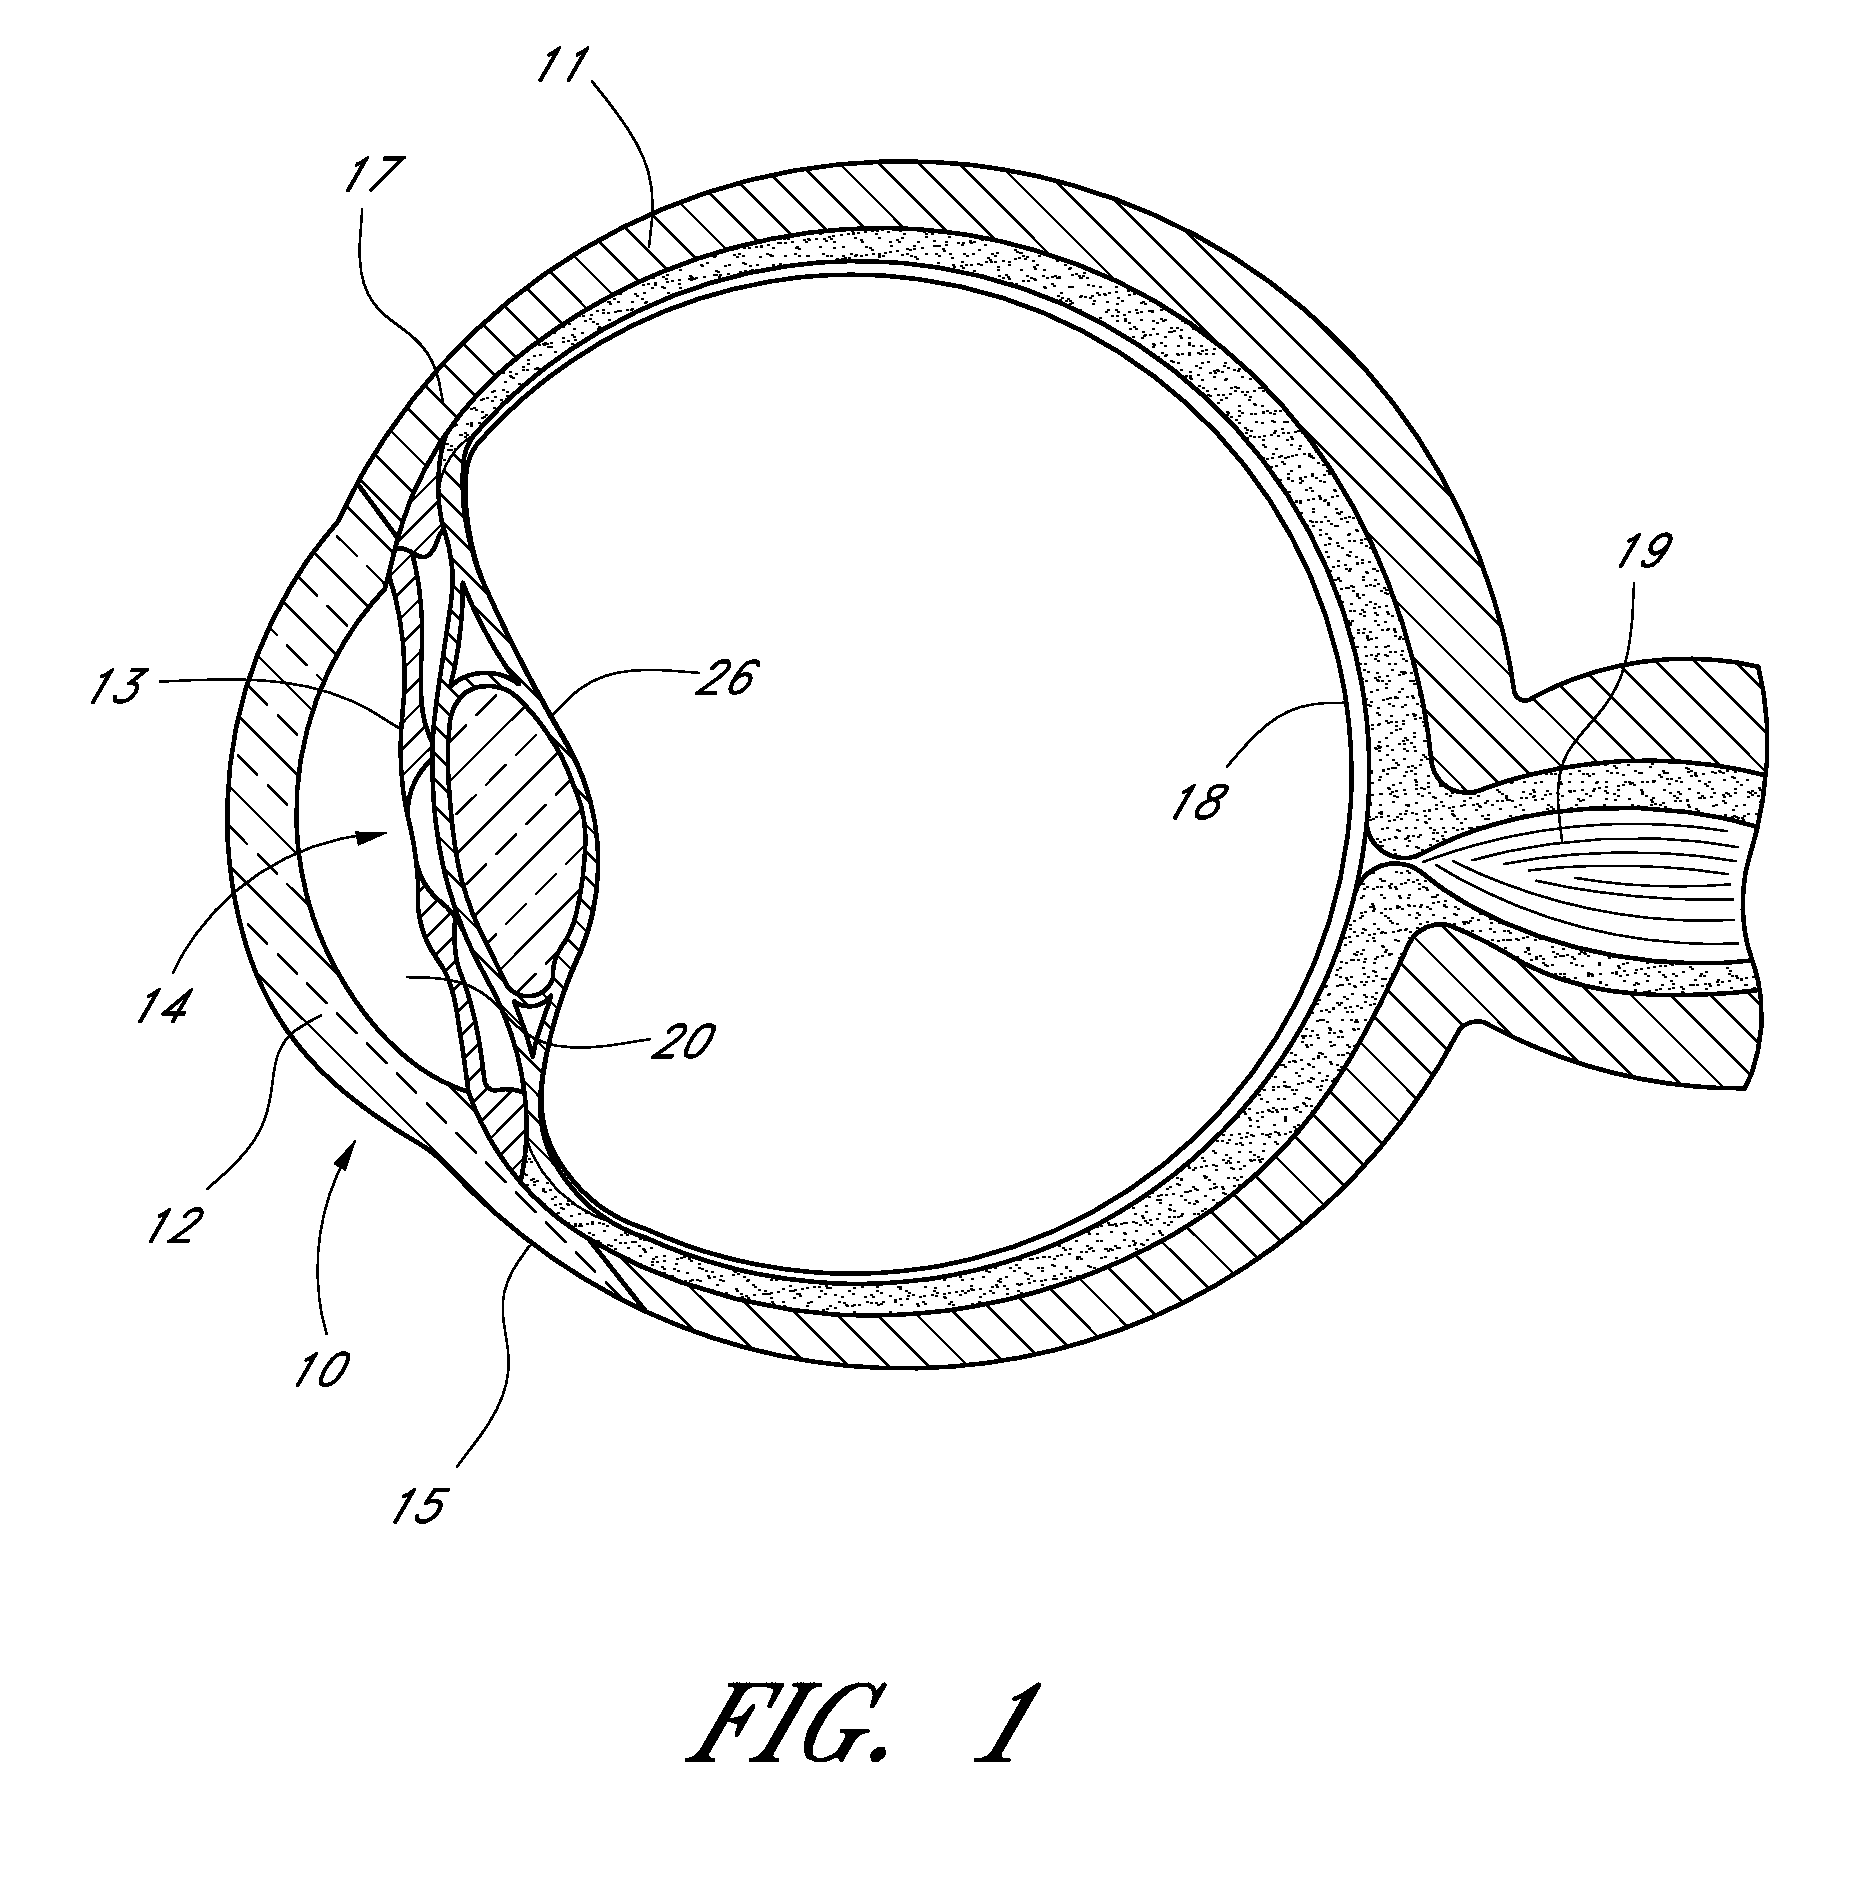 Method of monitoring intraocular pressure and treating an ocular disorder